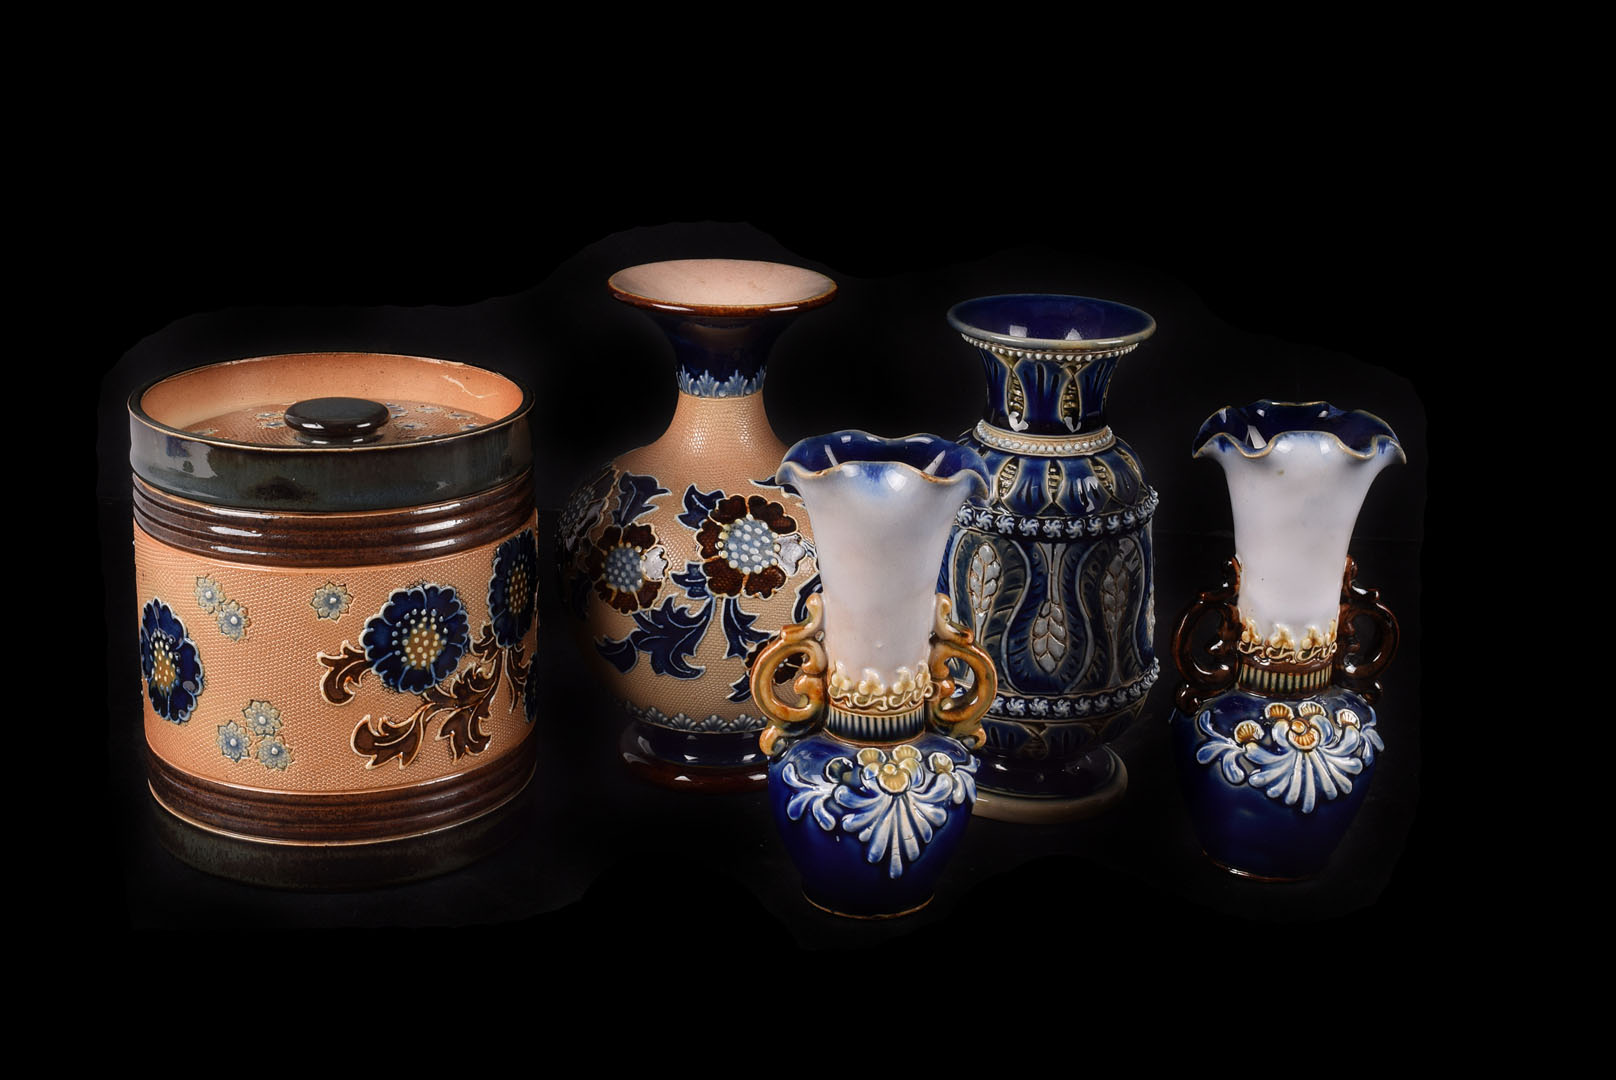 A Doulton Lambeth ware blue vase, 14cm high together with a similar 15cm example a pair of small